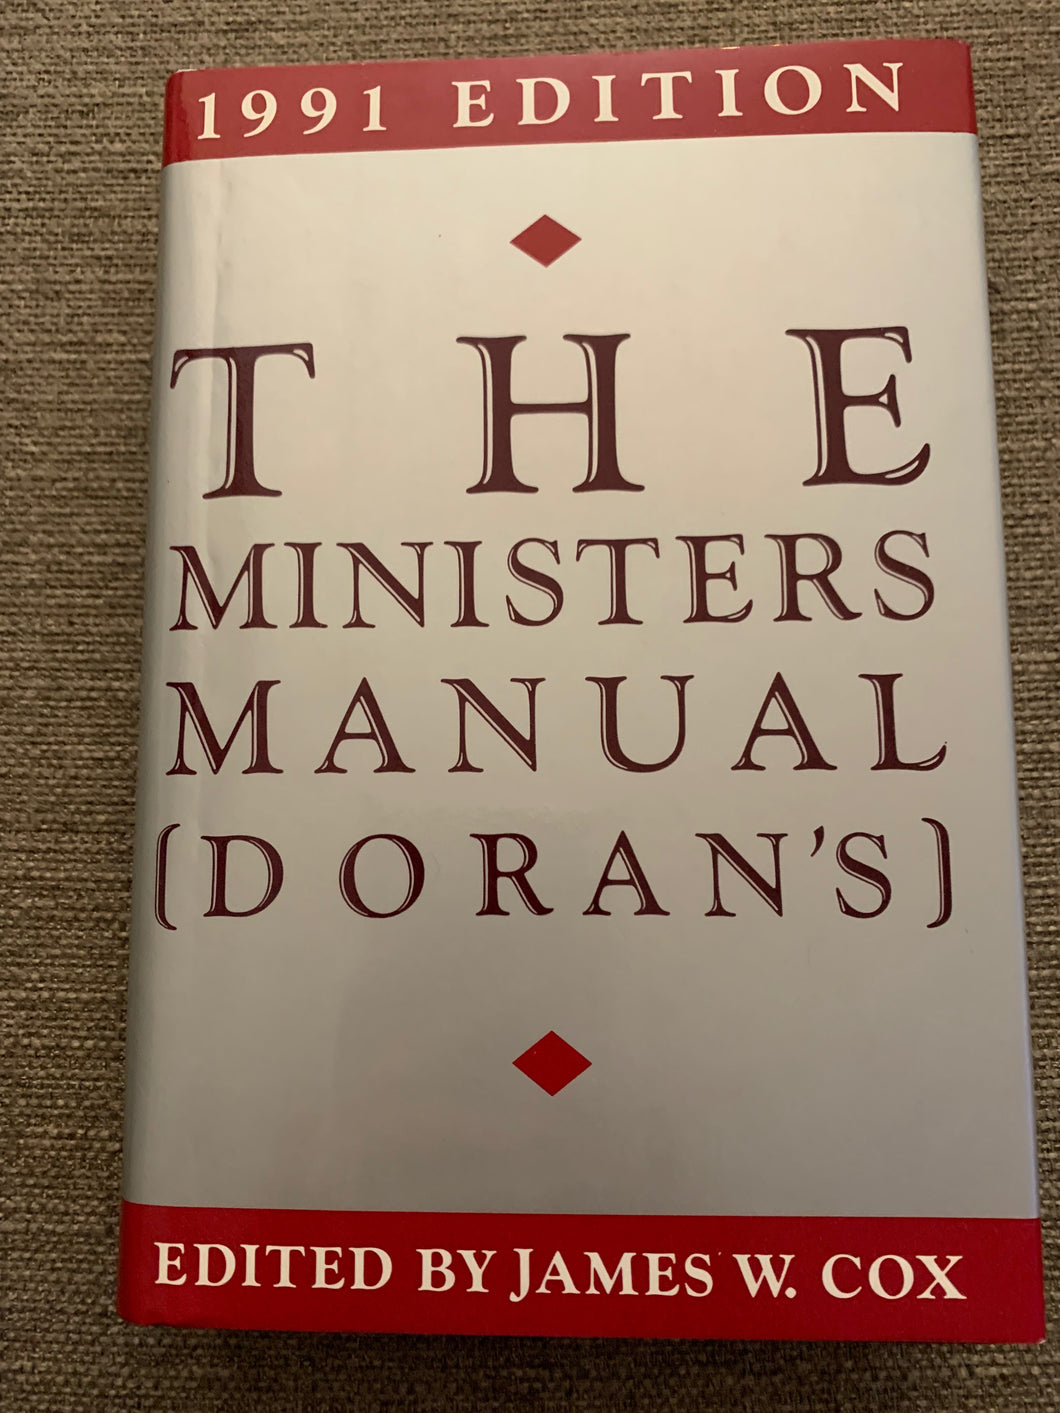 The Ministers Manual 1991 by James W. Cox